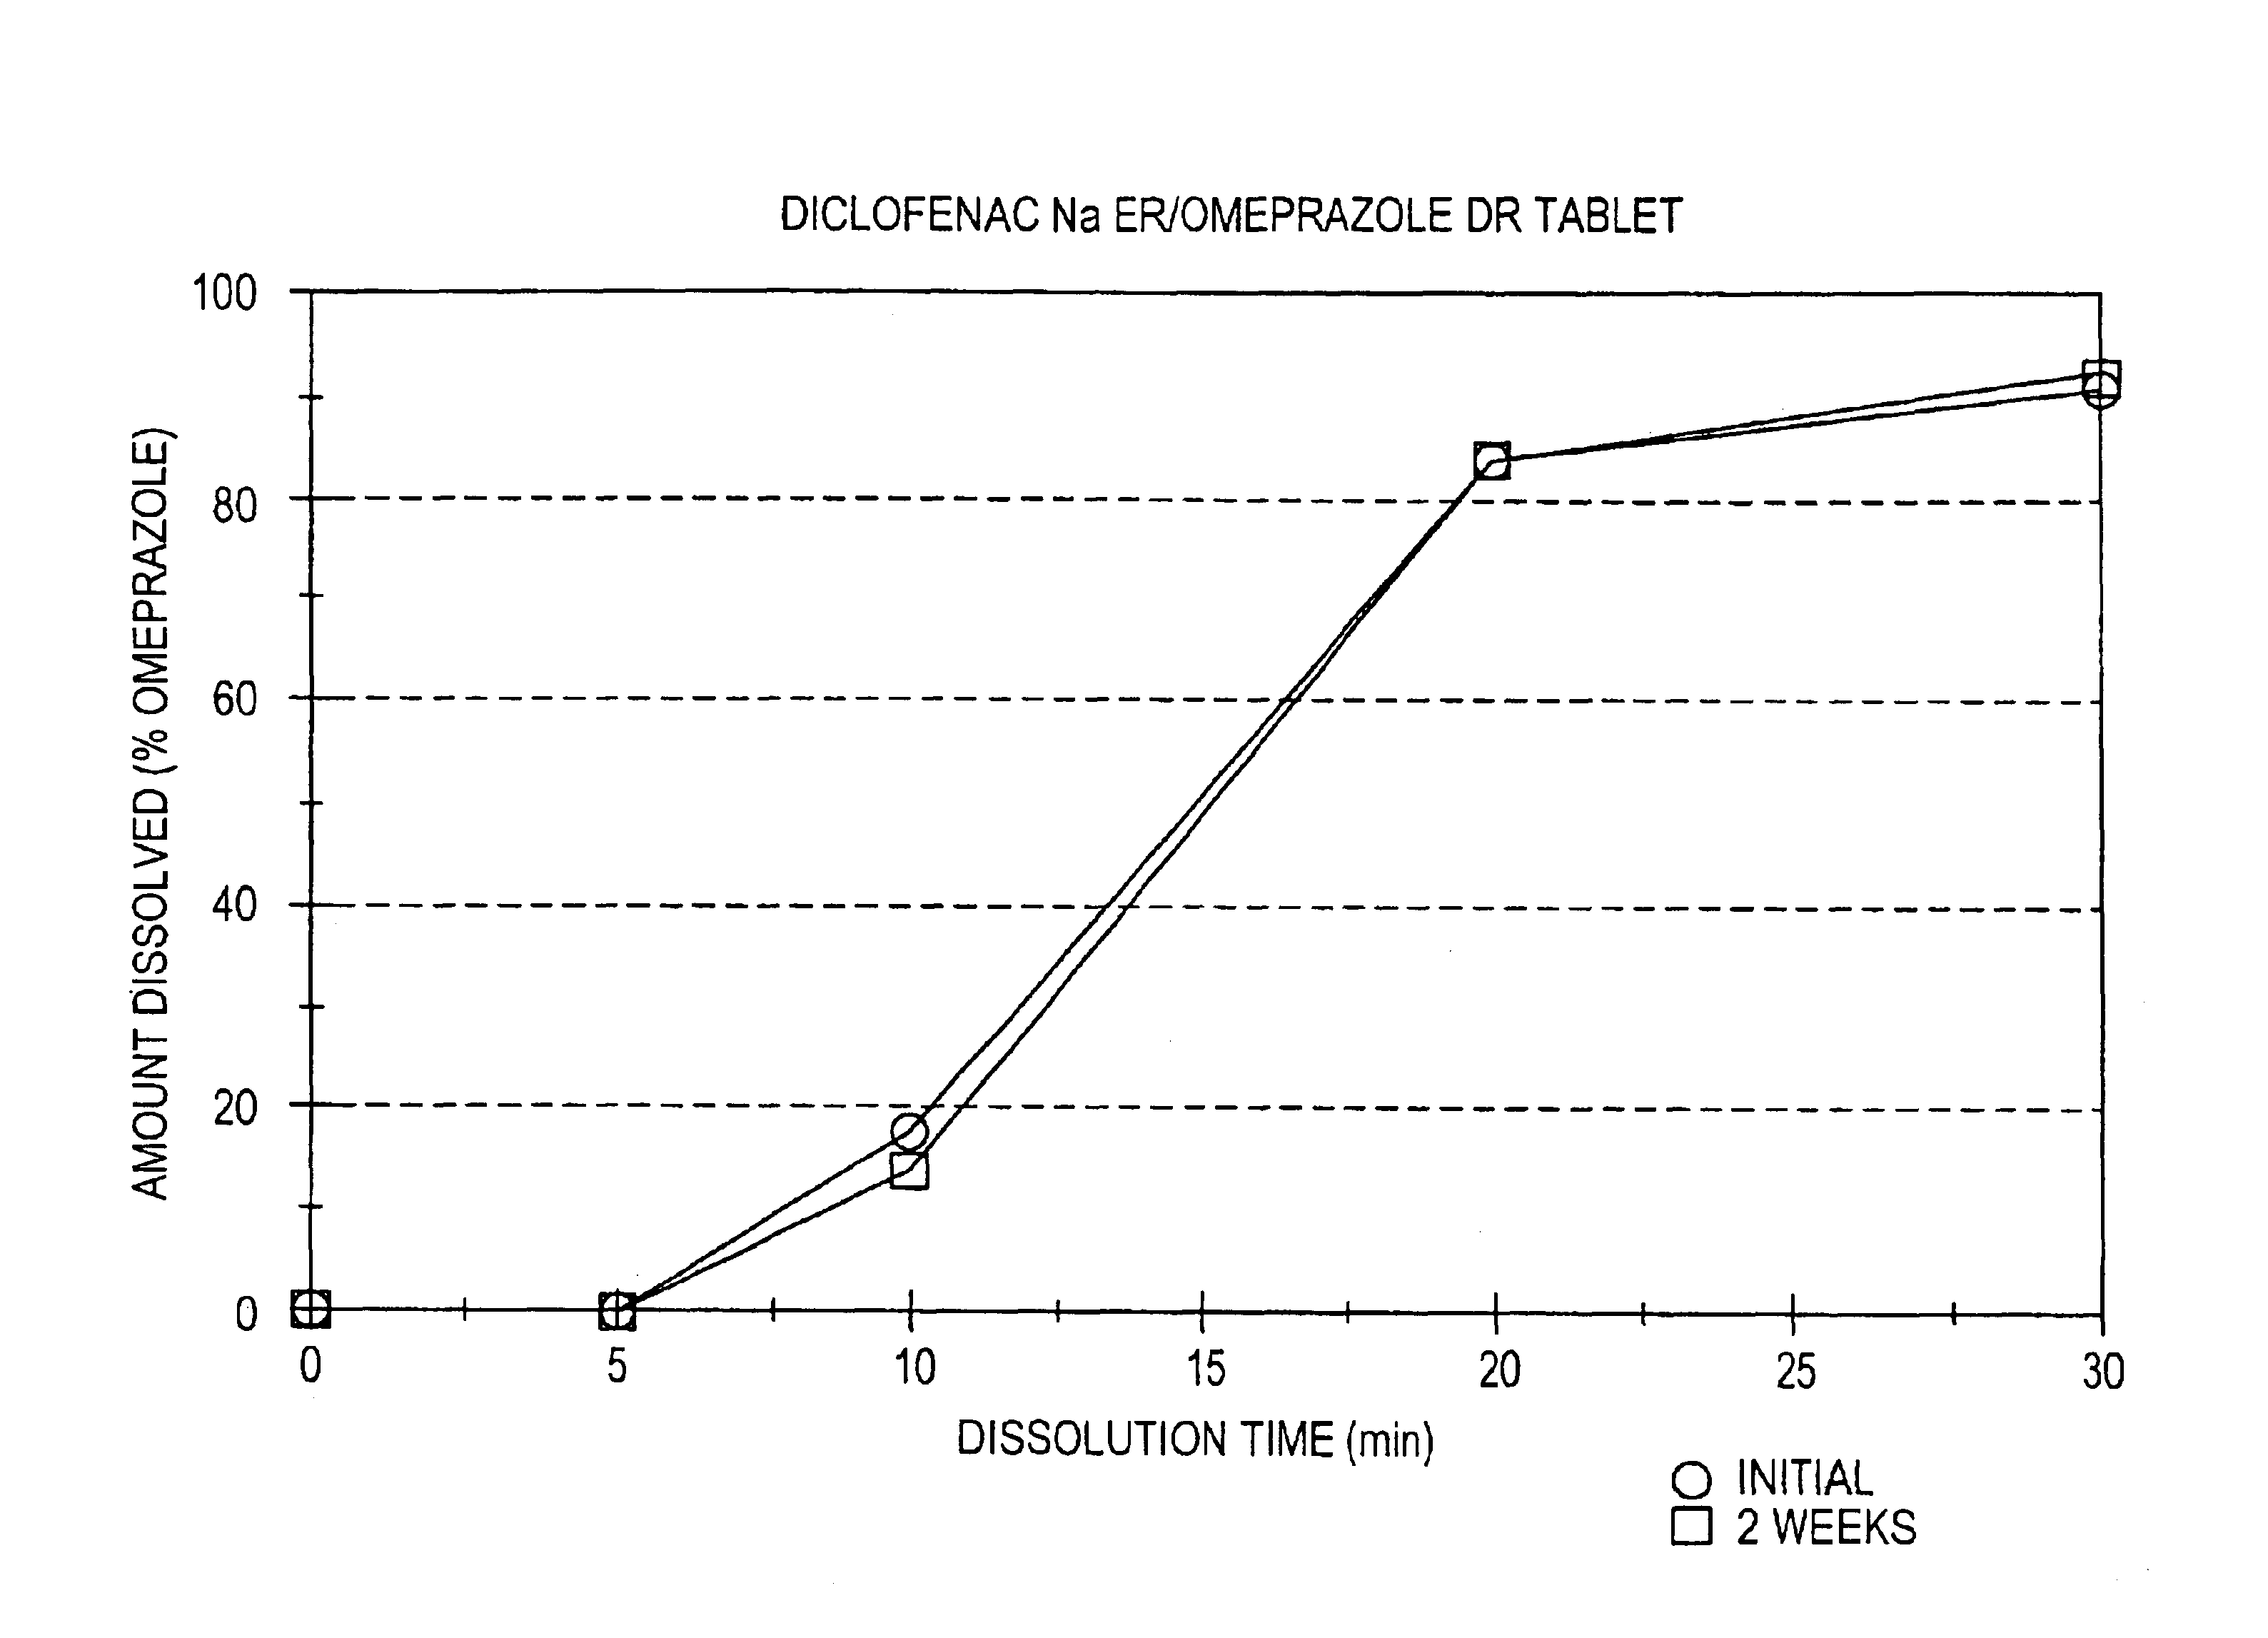 Pharmaceutical formulations containing a non-steroidal antiinflammatory drug and a proton pump inhibitor